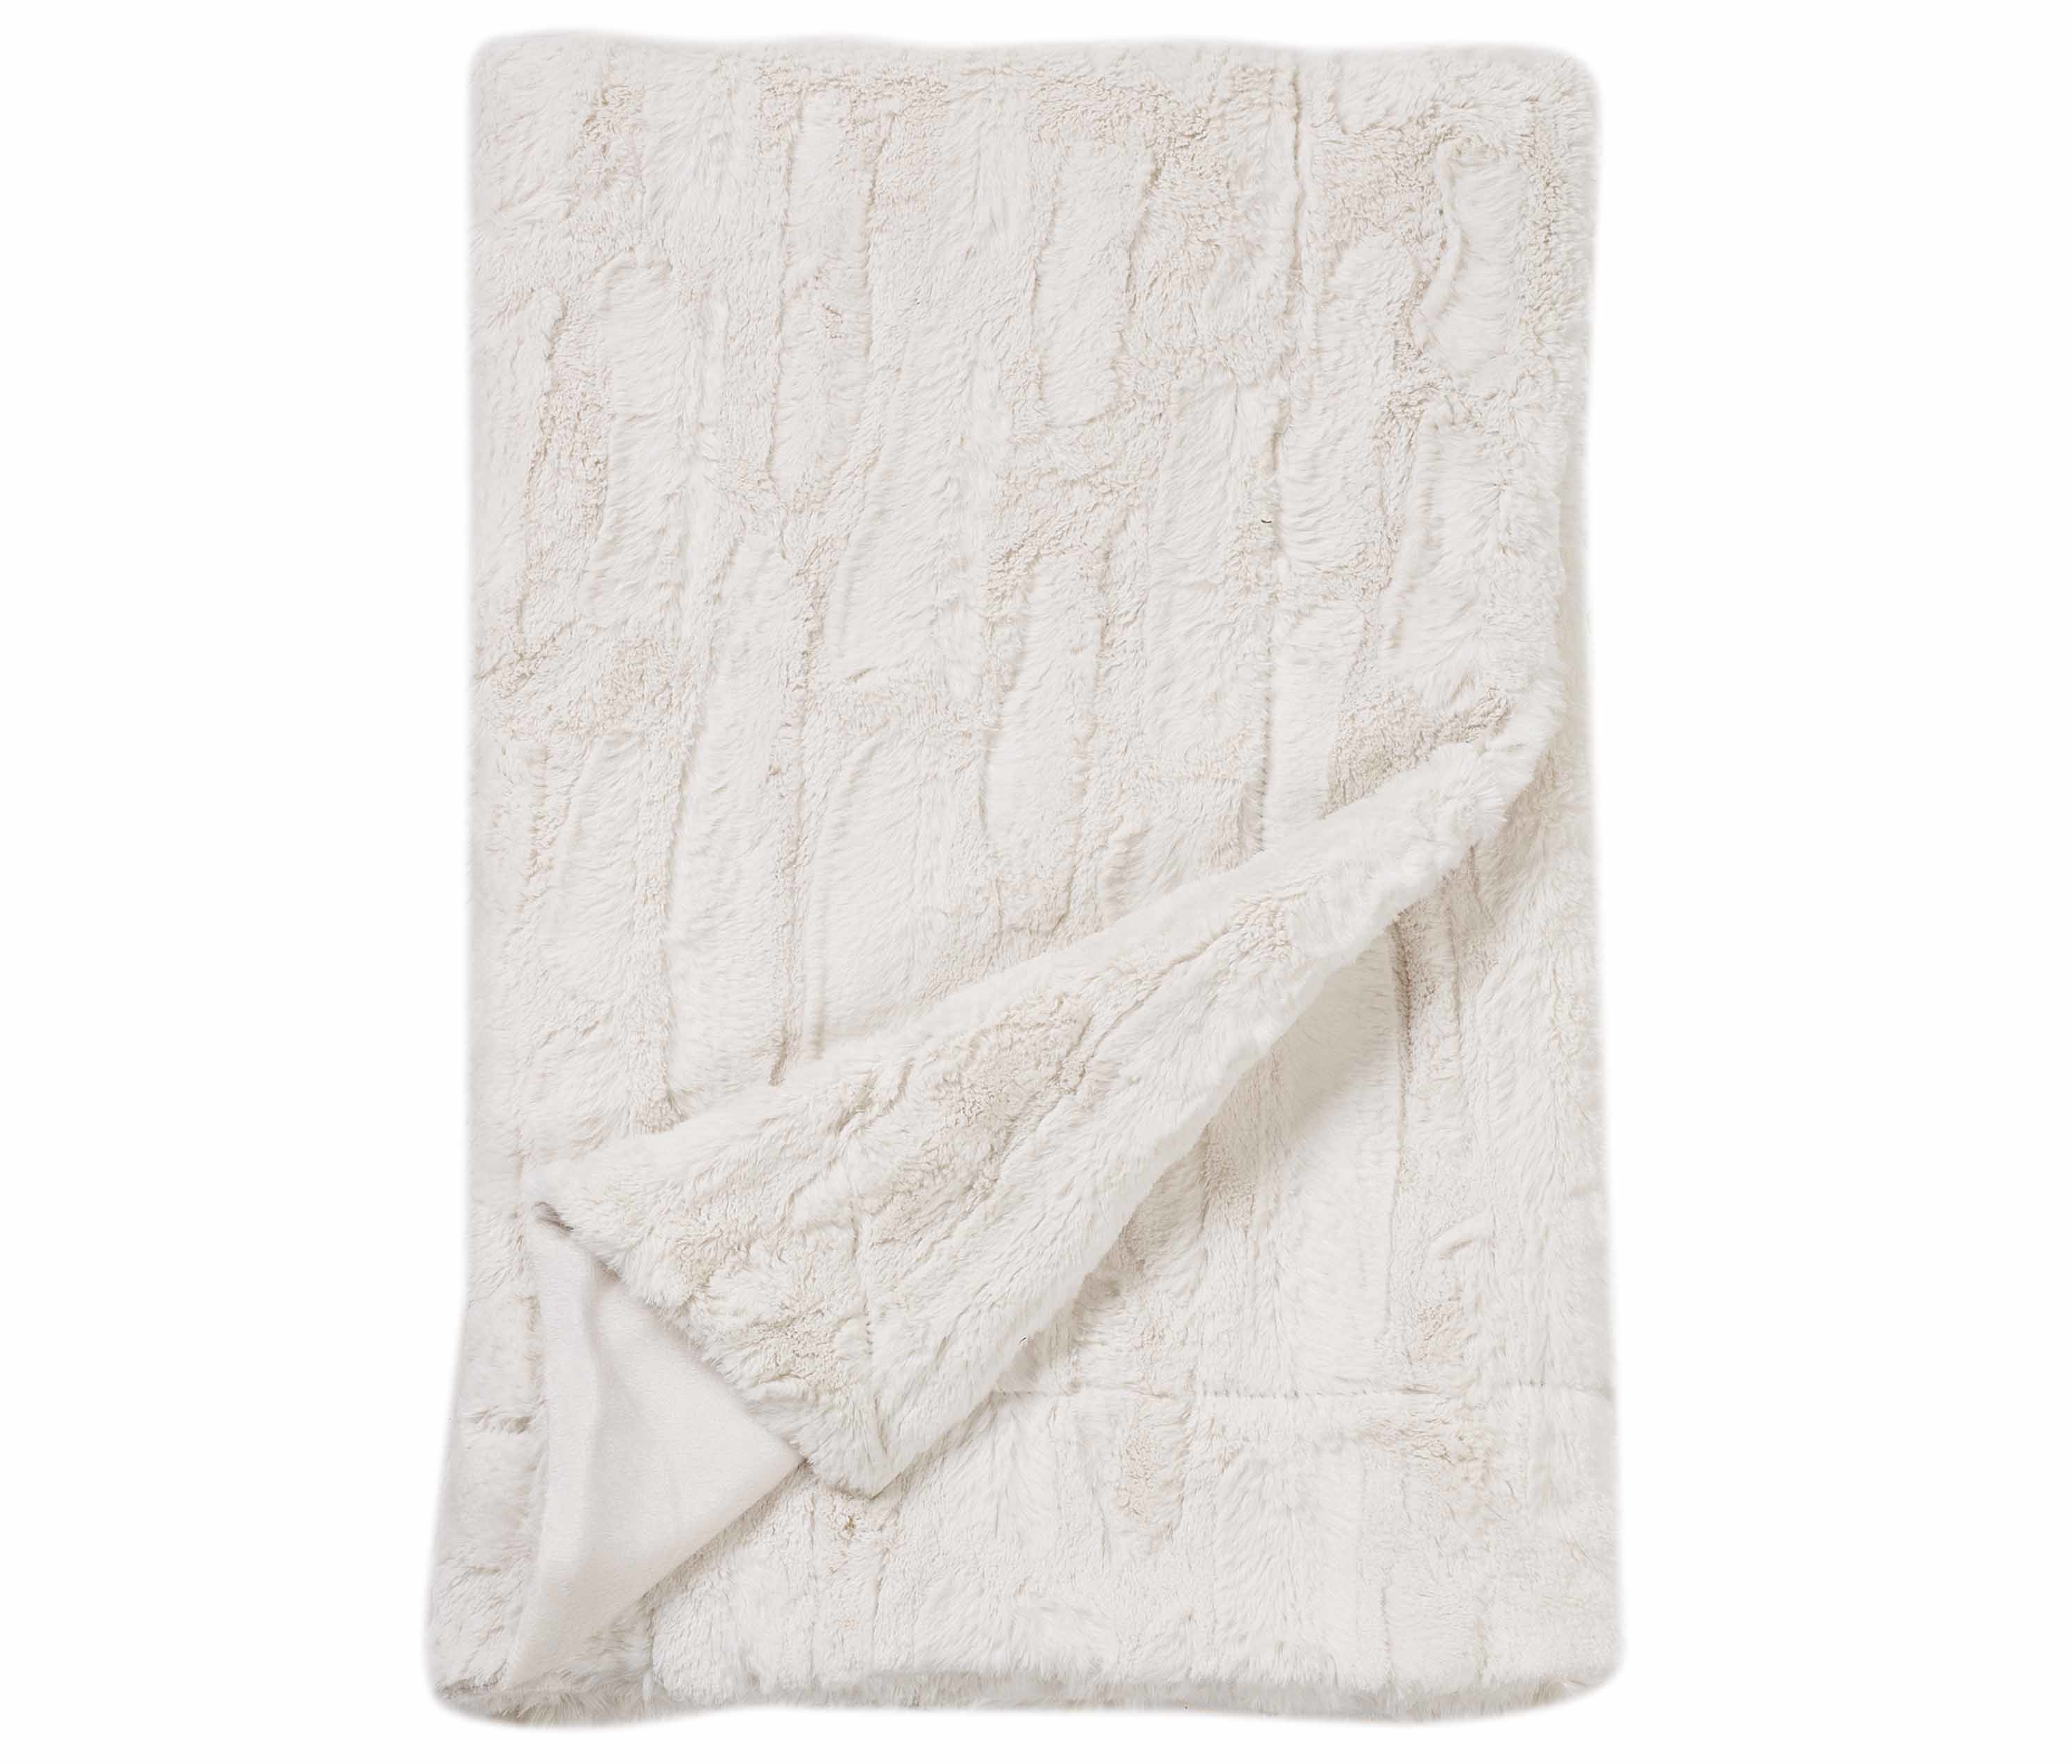 Home Decor Embossed Cozy Faux-fur Throw 50\" X 60\" - 8 Solid Colors - White